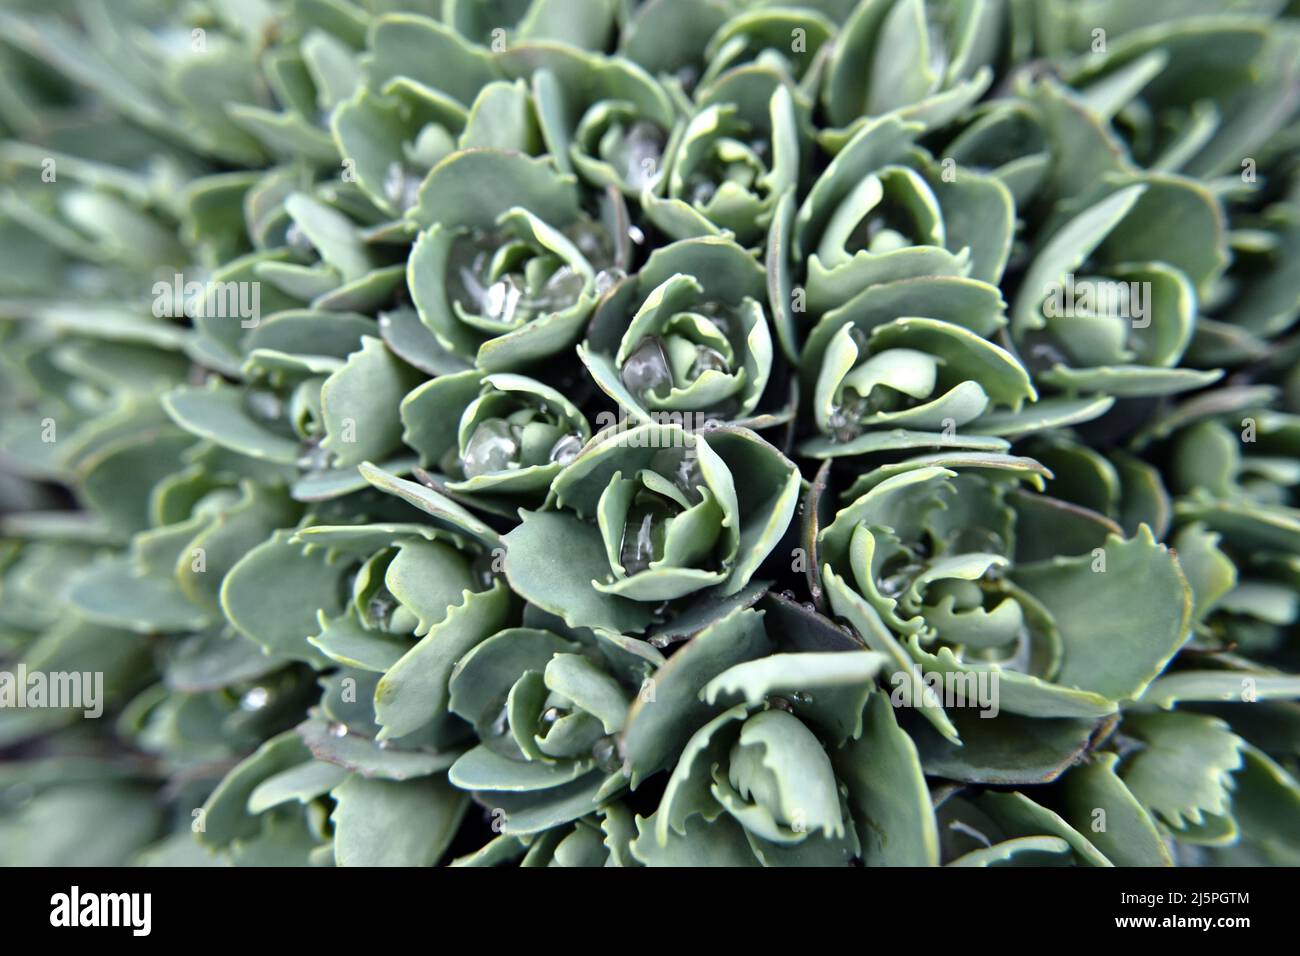 Sedum flowers with stems and dew drops, vegetable background. Texture of small, unblown green plants. Saxifraga paniculata Mill, Hylotelephium telephi Stock Photo